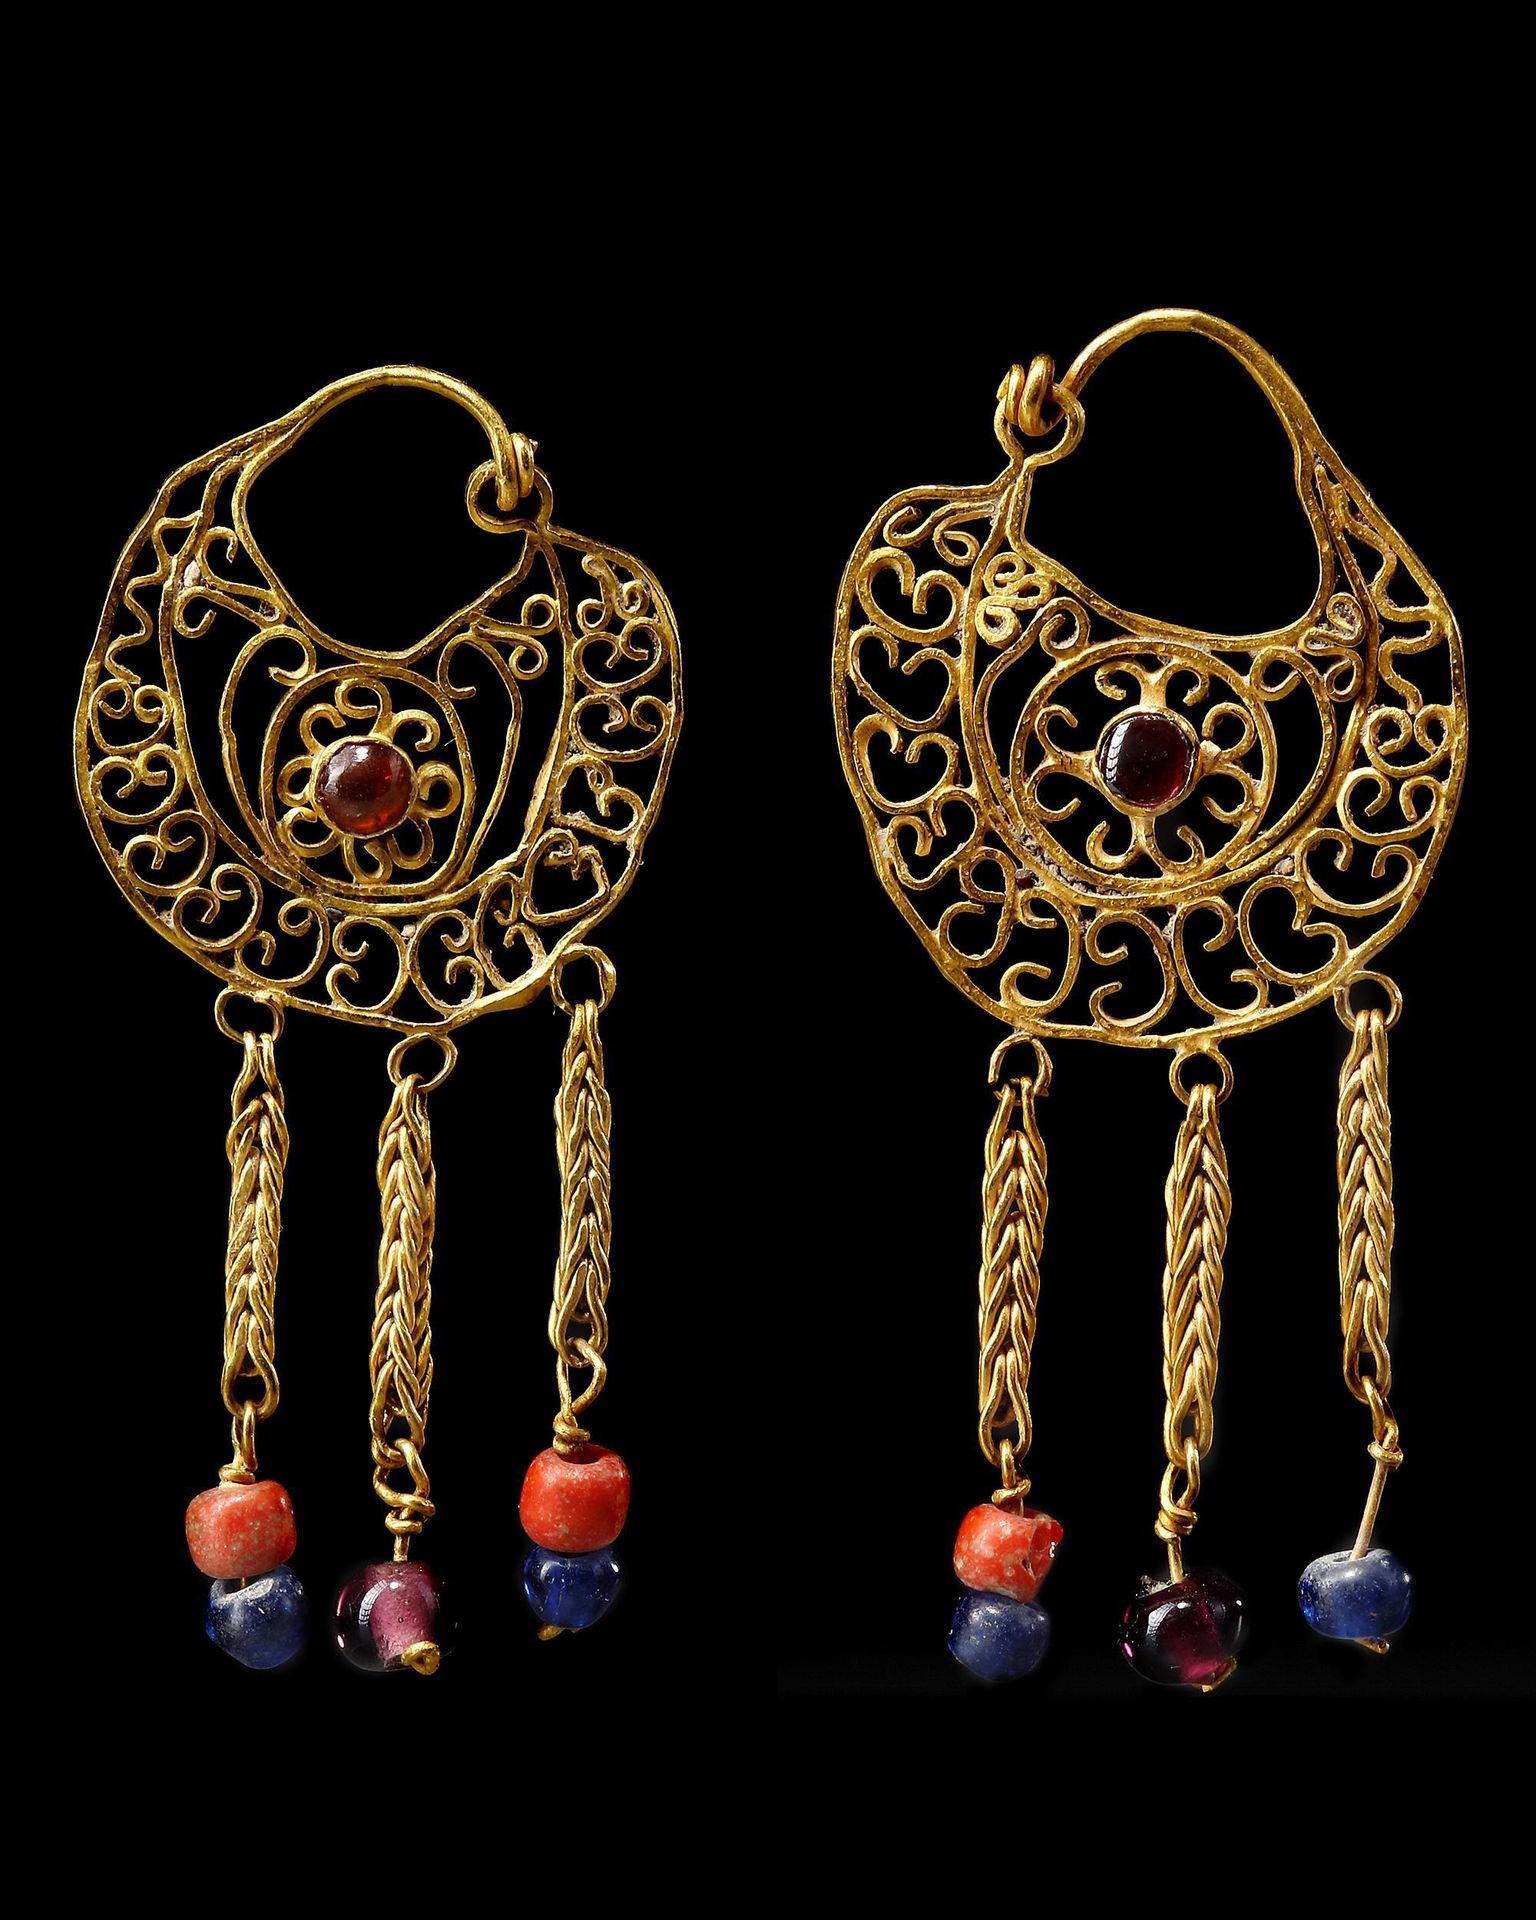 A PAIR OF BYZANTINE GOLD EARRINGS, CIRCA 7TH-8TH CENTURY A.D. A pair of Byzantin&hellip;